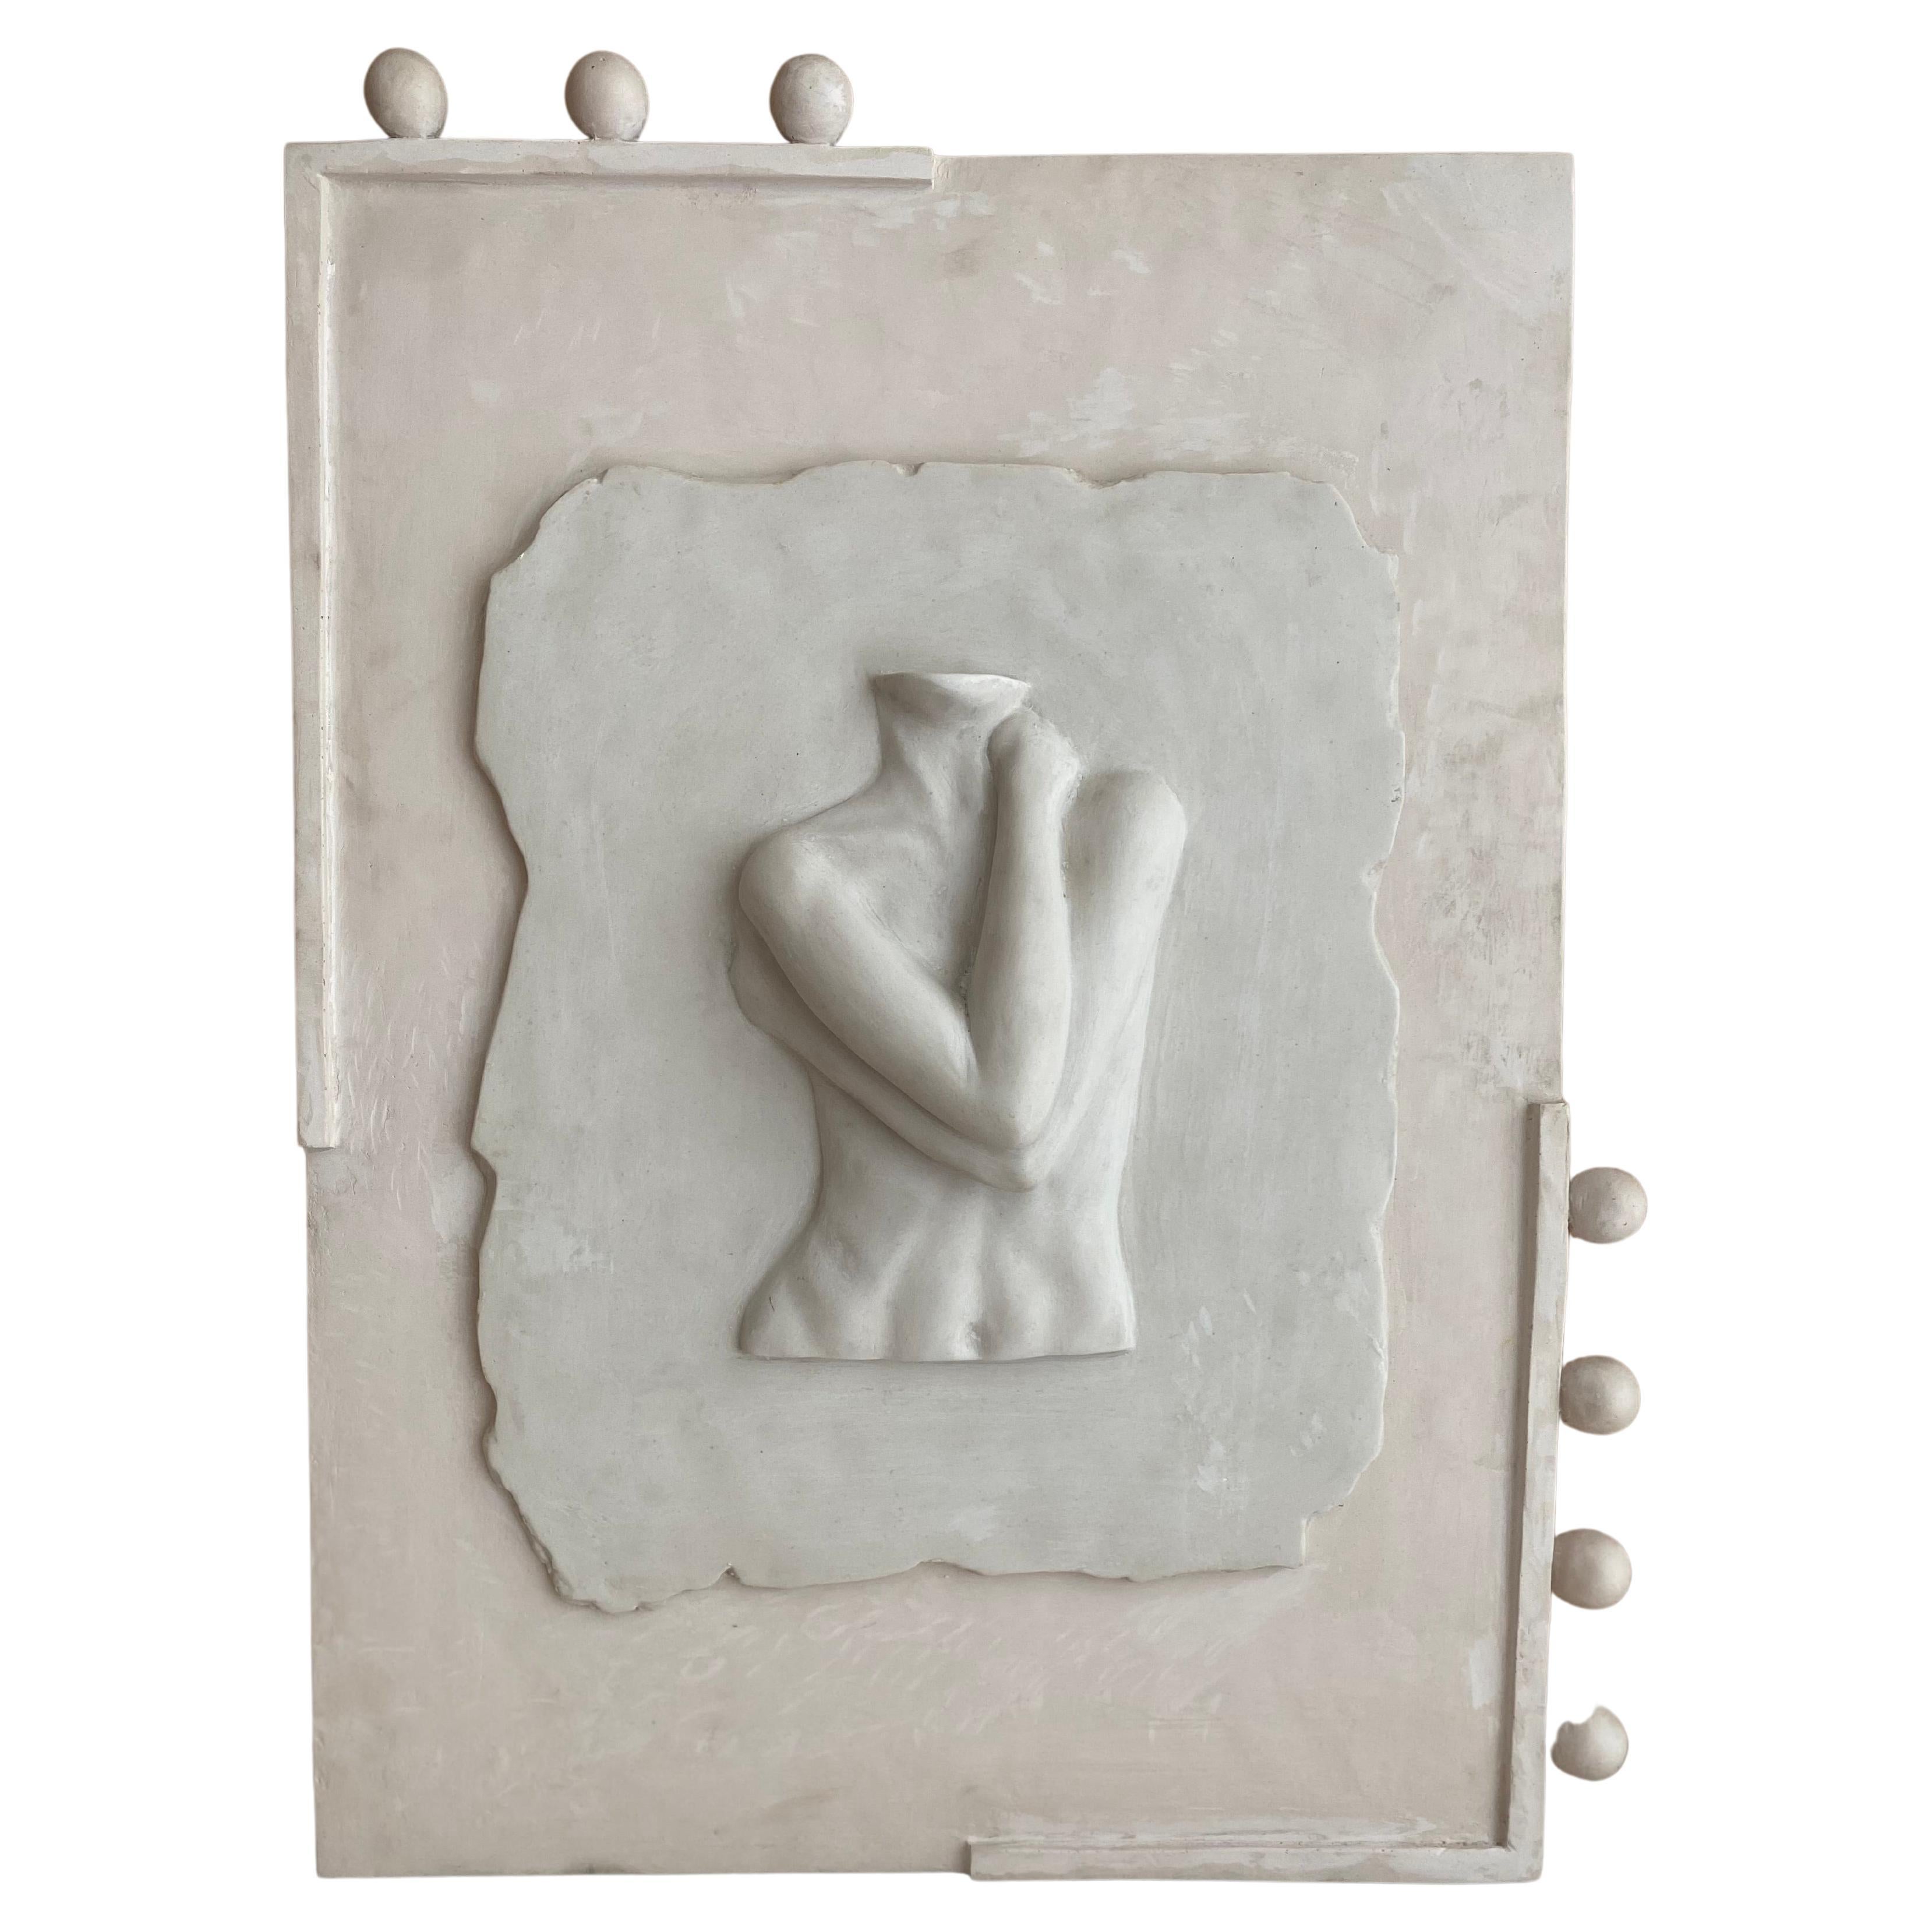 Marcela Cure Female Torso and Arms Wall Art Sculpture Resin and Stone Number 25 For Sale